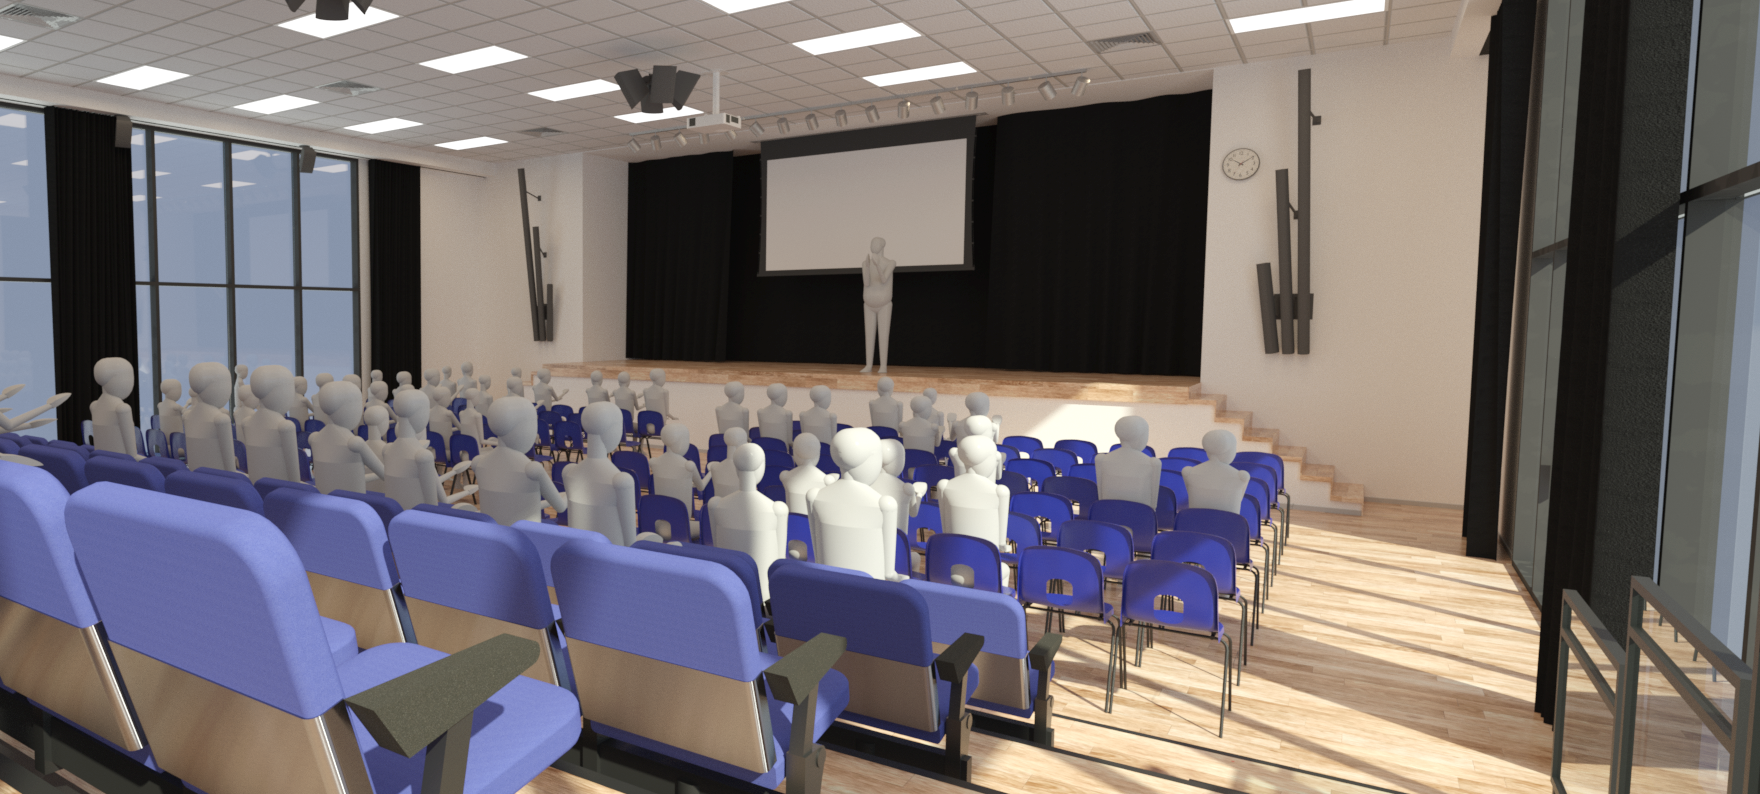 Revit render of assembly hall with all collection families.